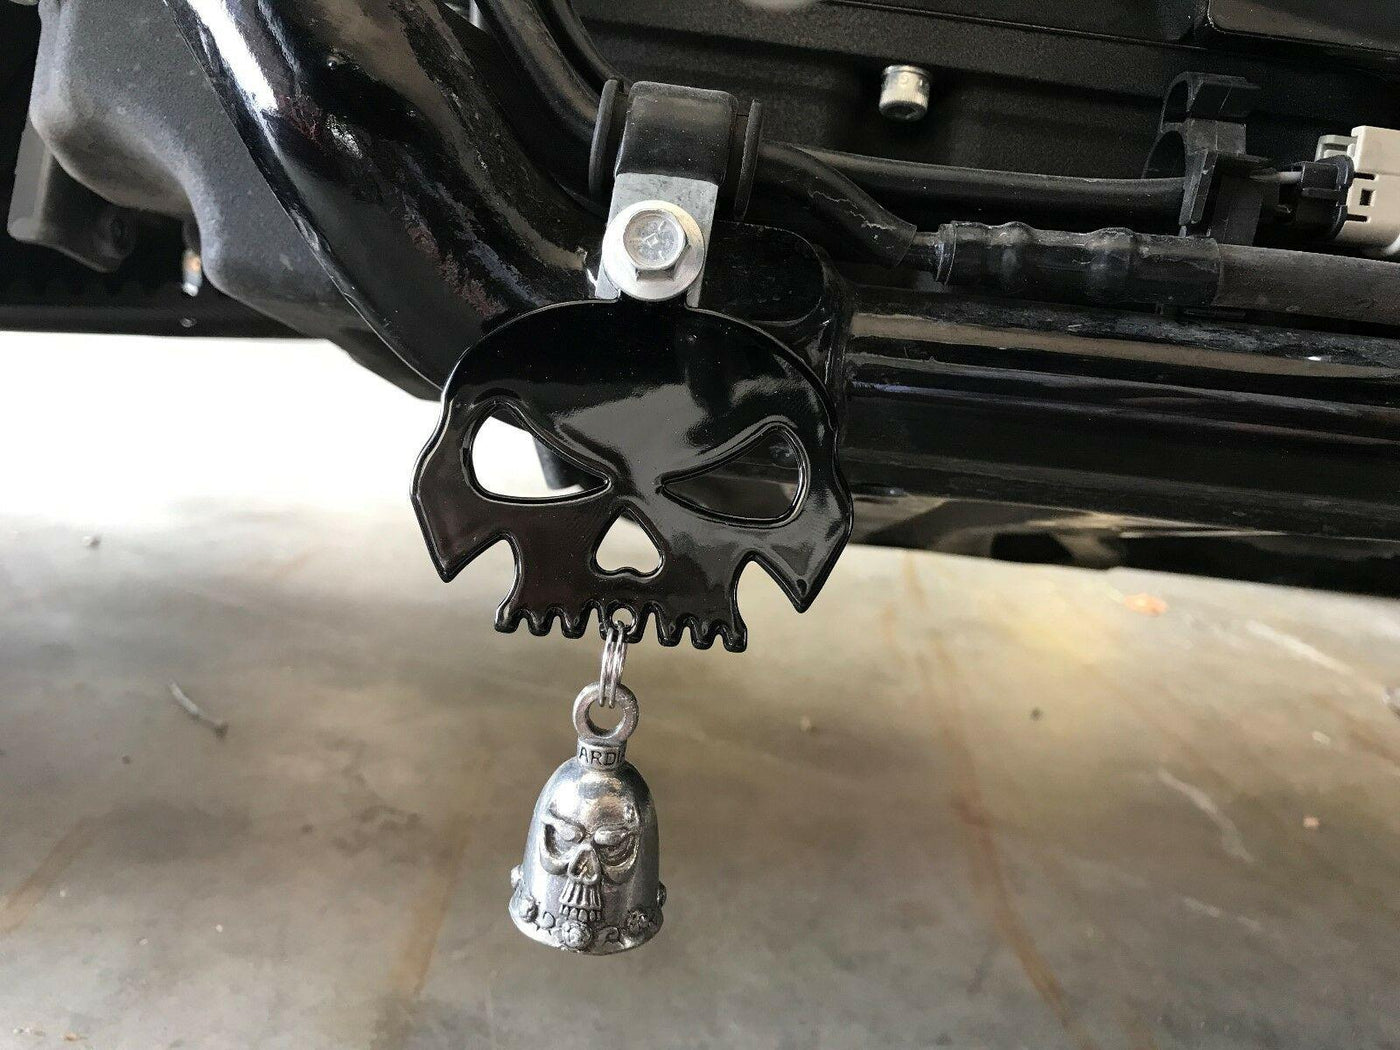 Gloss Black Skull Bell Hanger / Mount for Motorcycle Harley Bolt & Ring Included - Moto Life Products